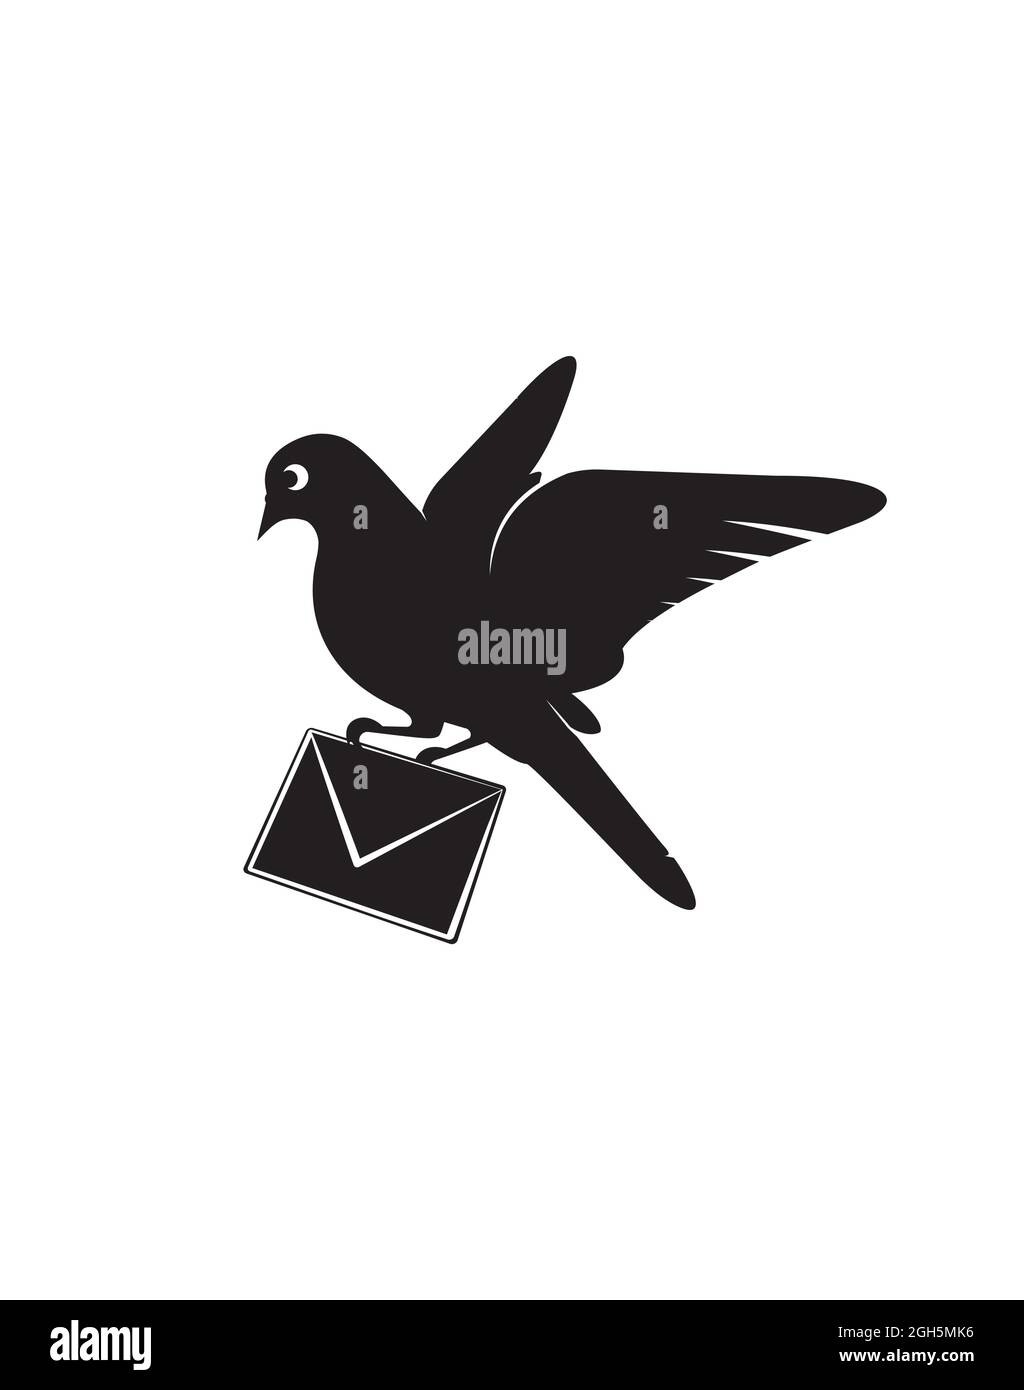 Flying bird silhouette holding letter, Vector. Pigeon bird illustration isolated on white background. Black and white wall decals. Art Decoration Stock Vector